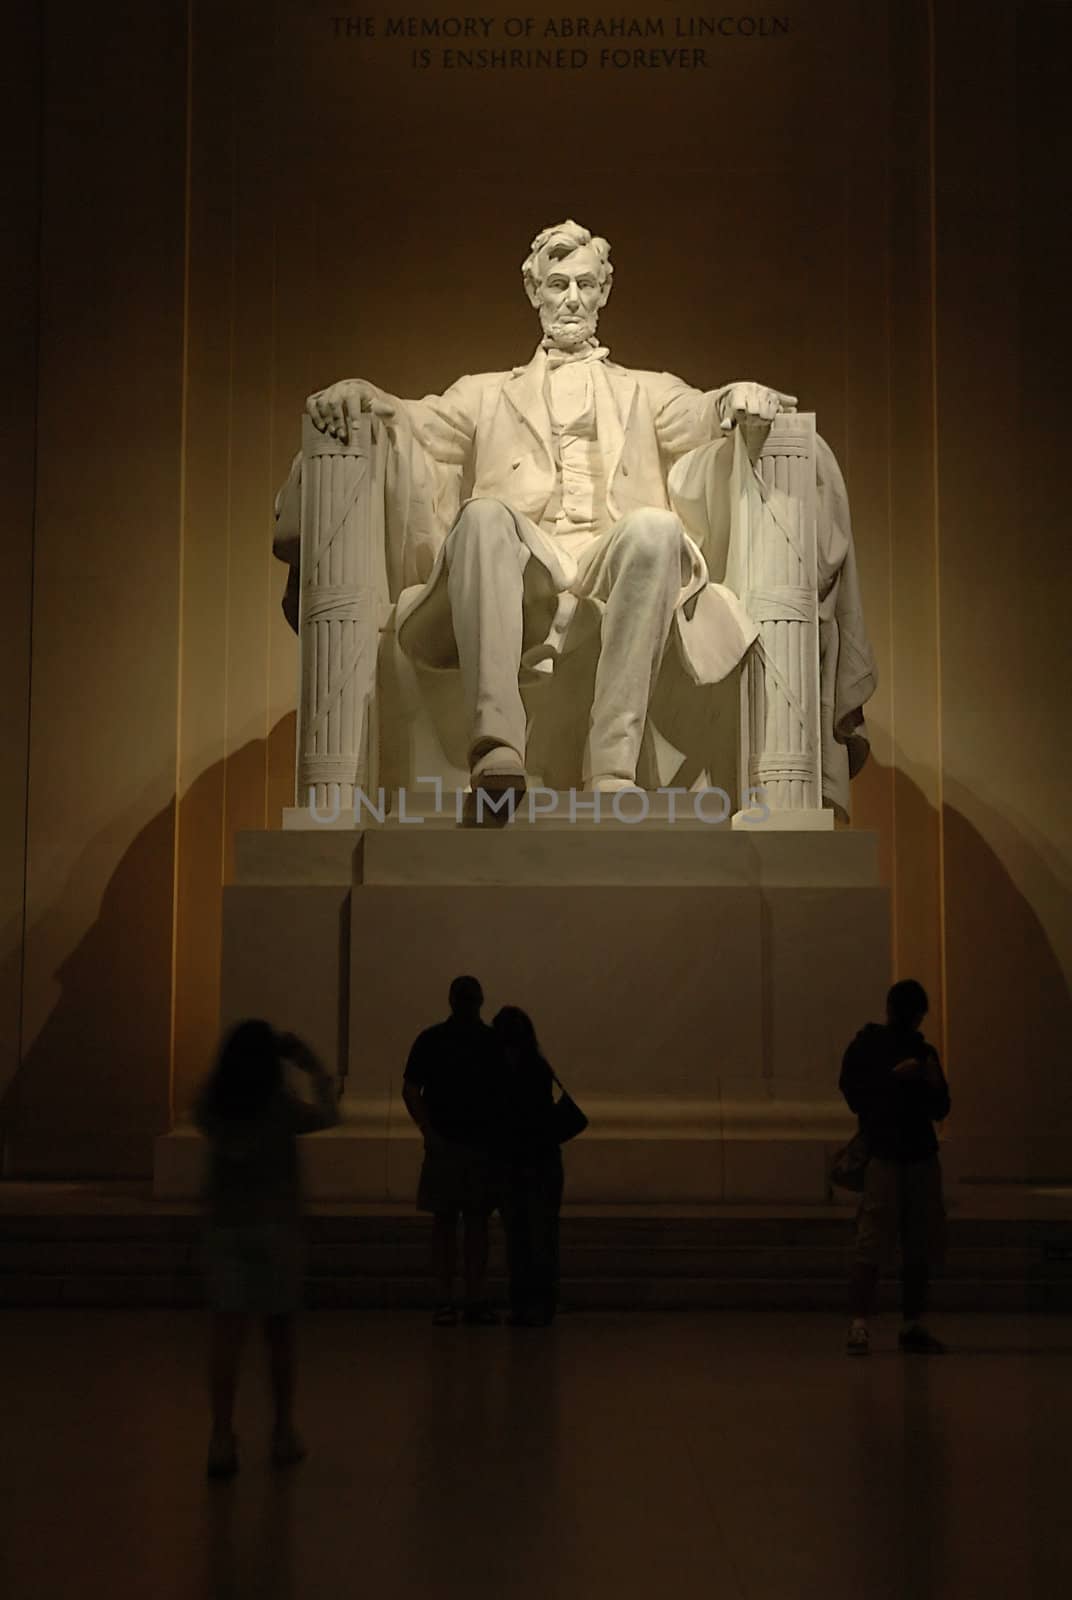 The Lincoln Memorial by rorem